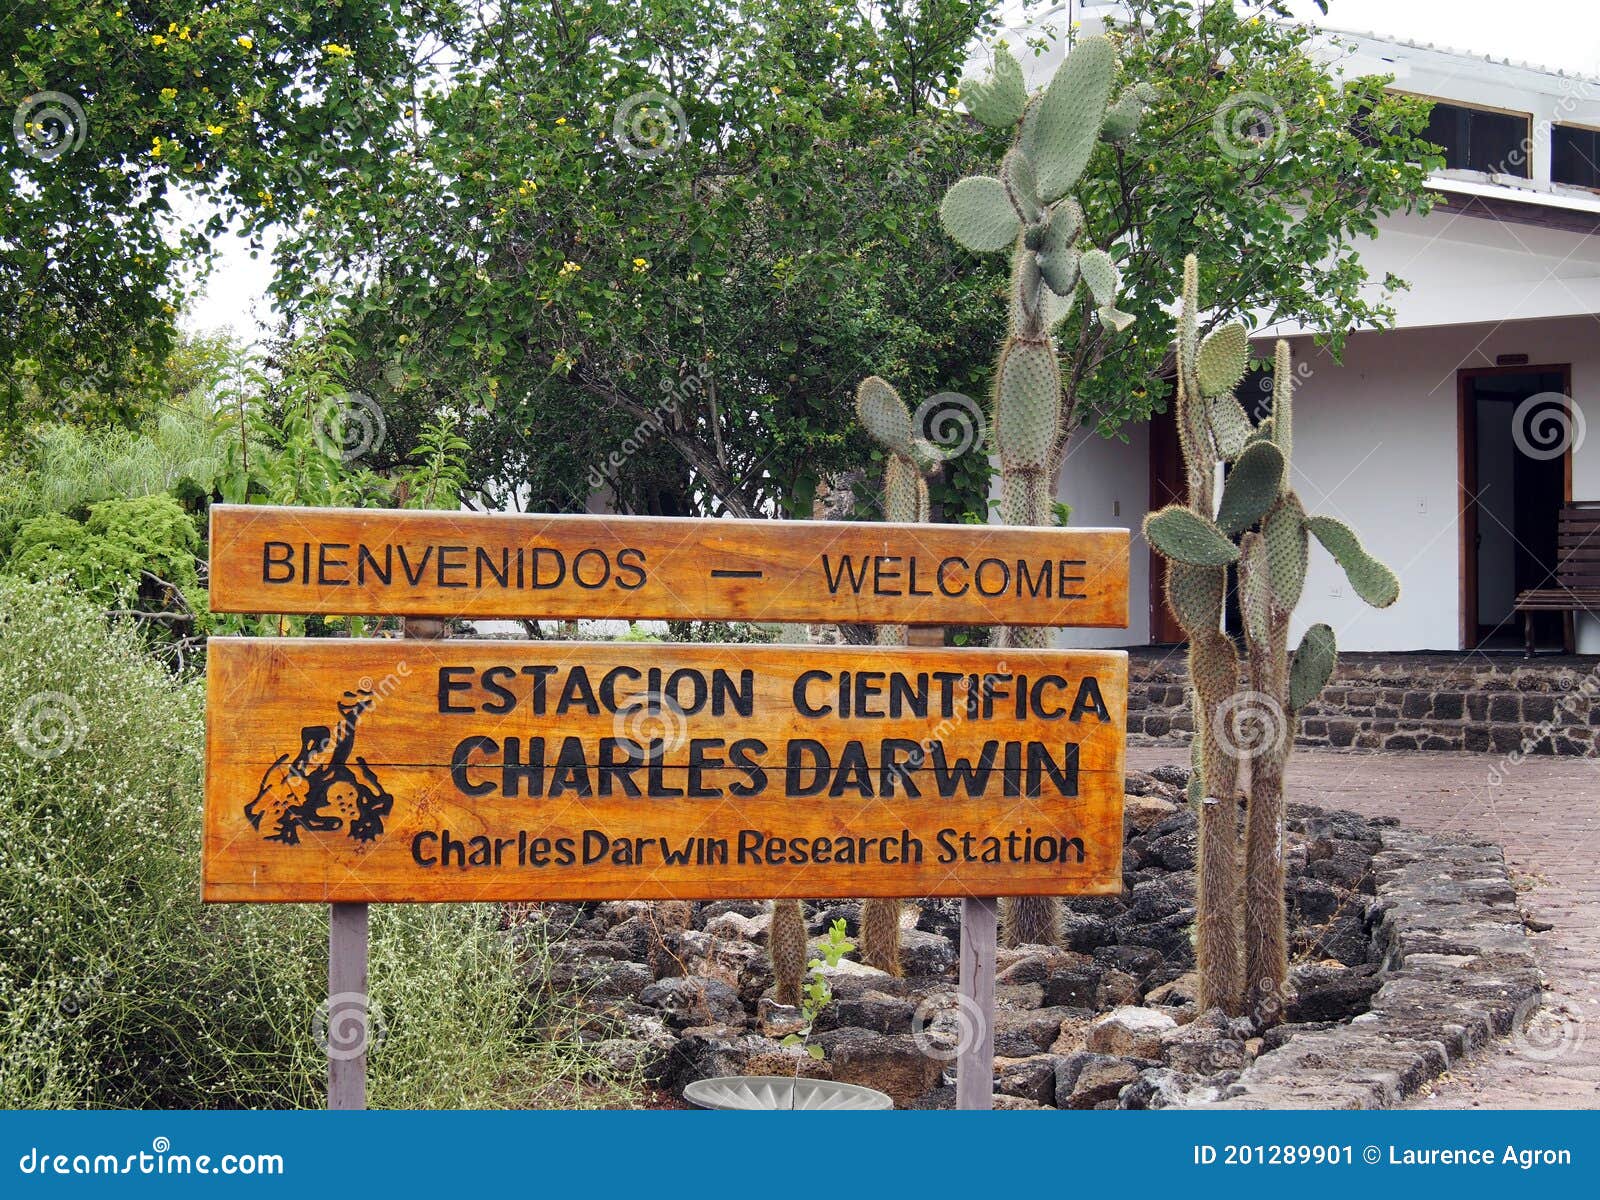 Charles Darwin Center Photos - Free & Royalty-Free Photos from Dreamstime